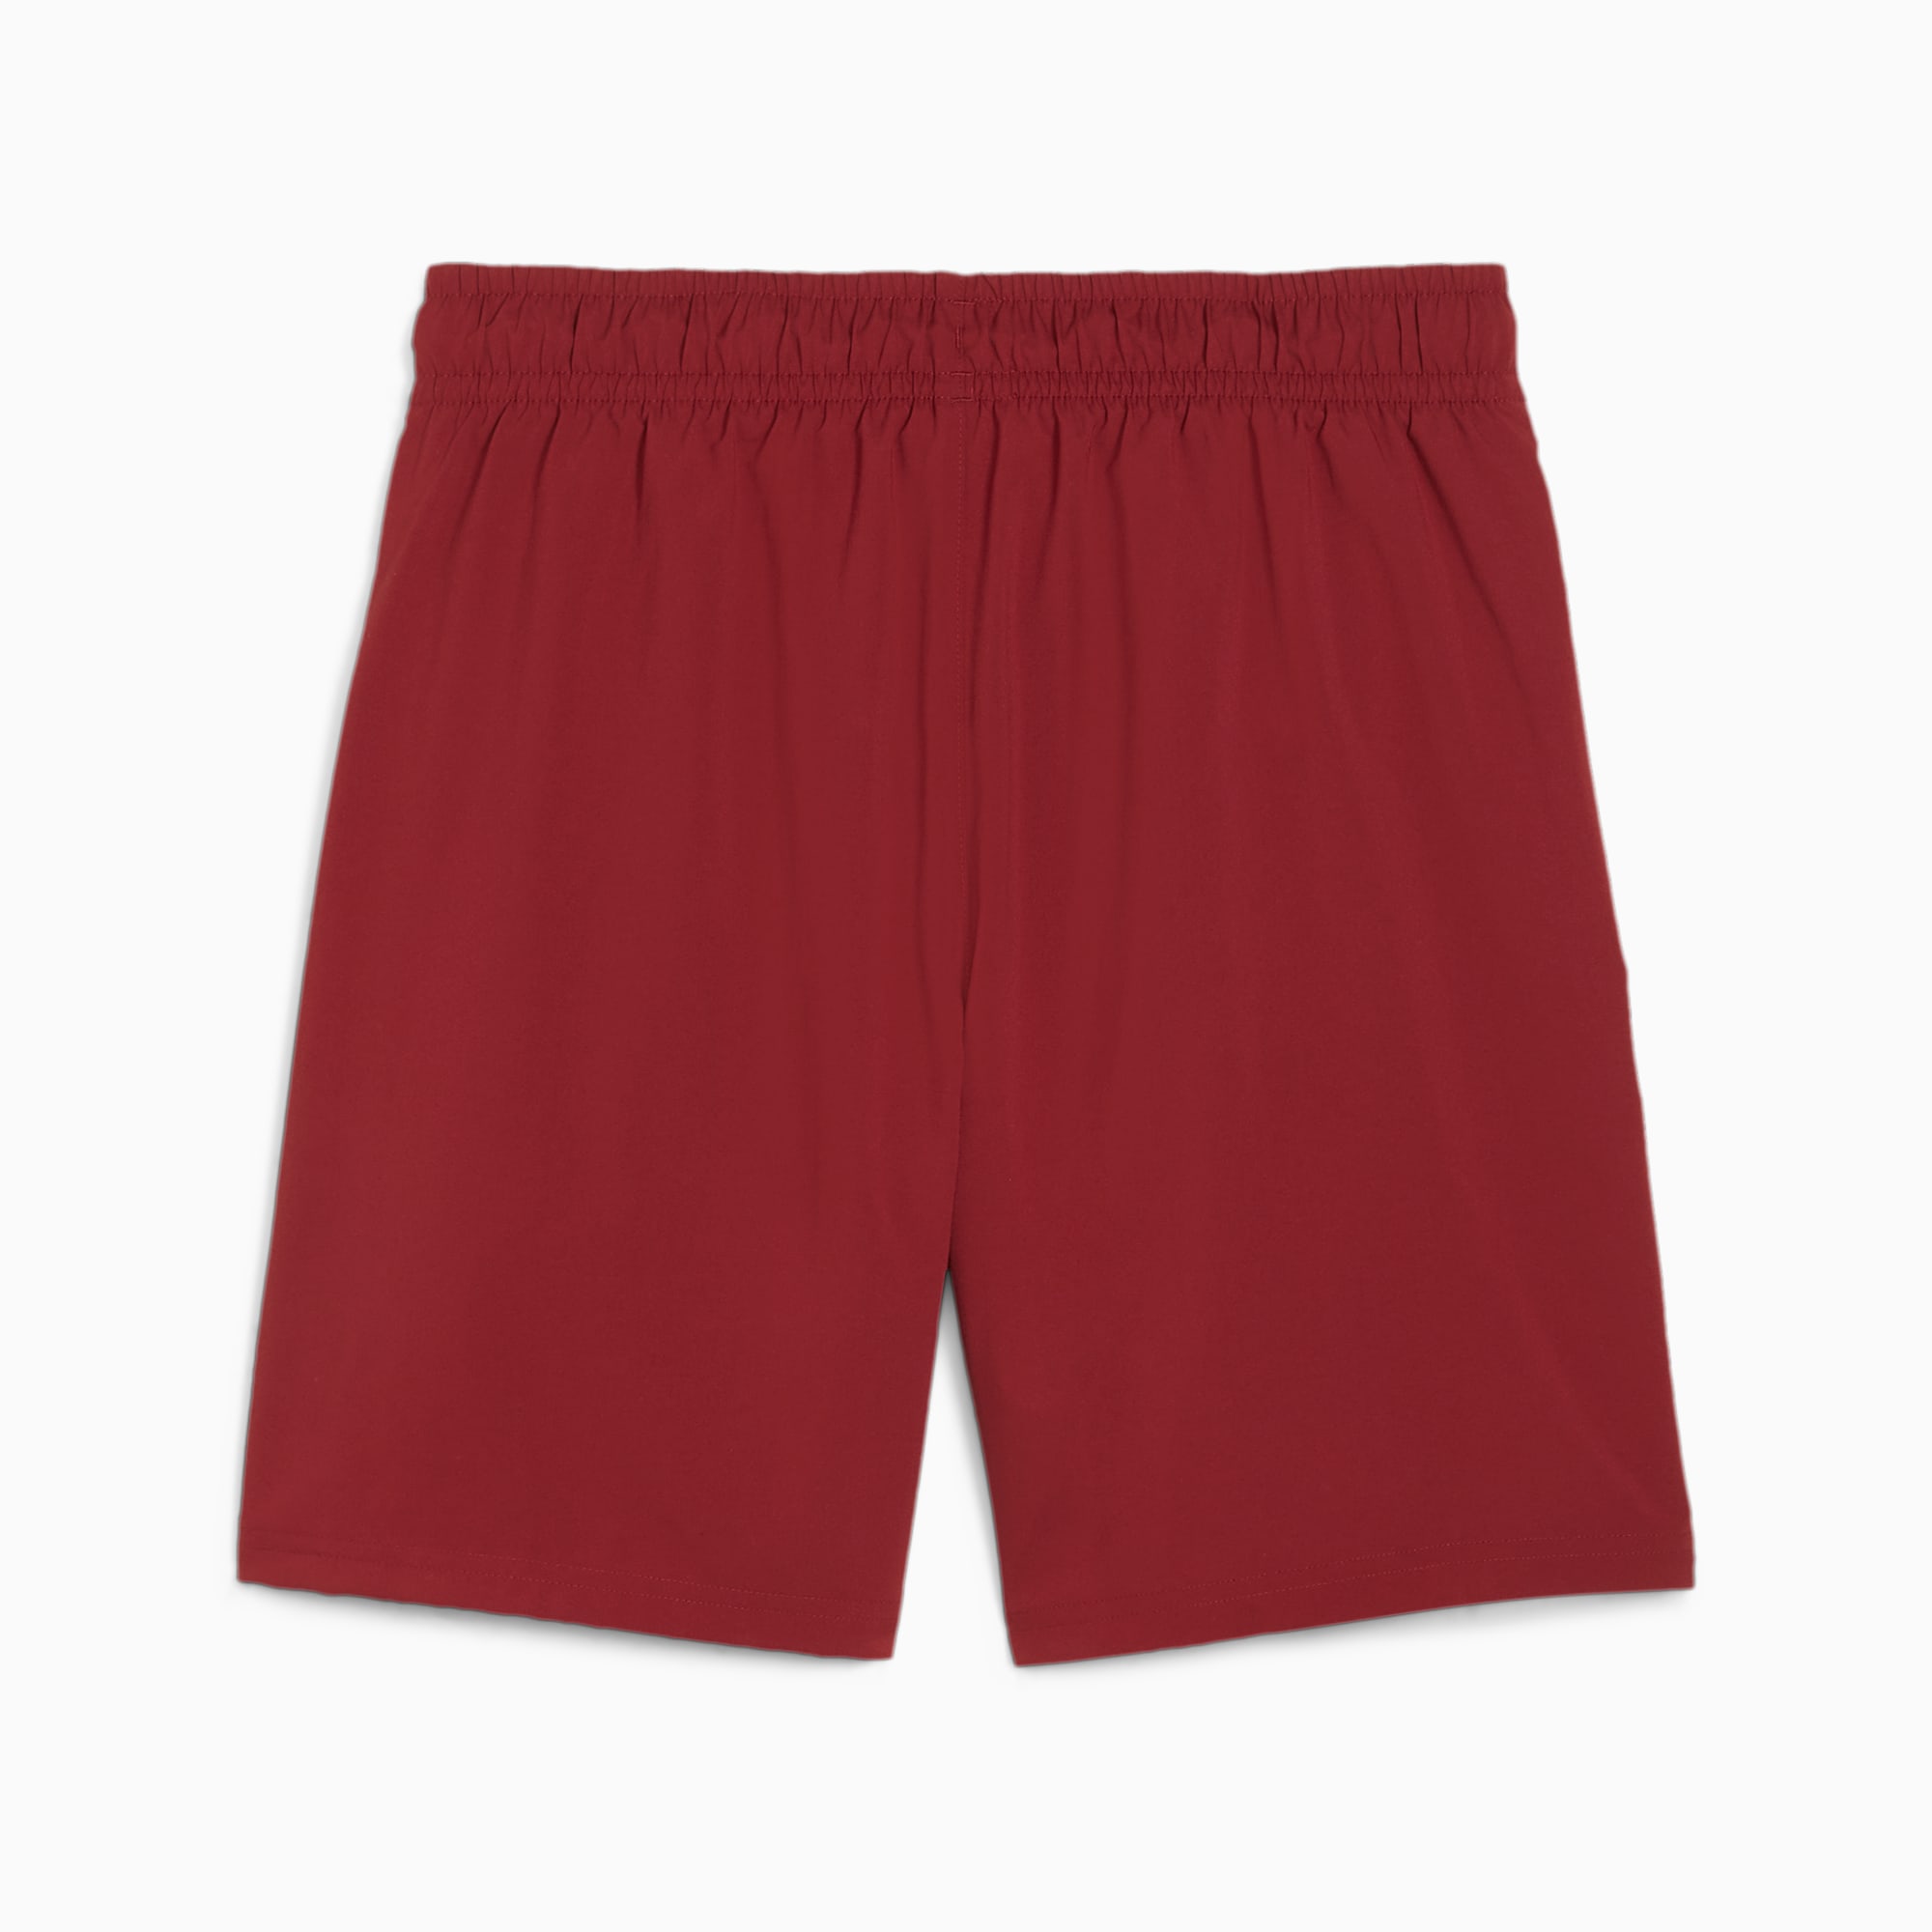 AC Milan Men's Woven Shorts, Team Regal Red-Fast Red-Cool Dark Gray, PUMA  Shoes